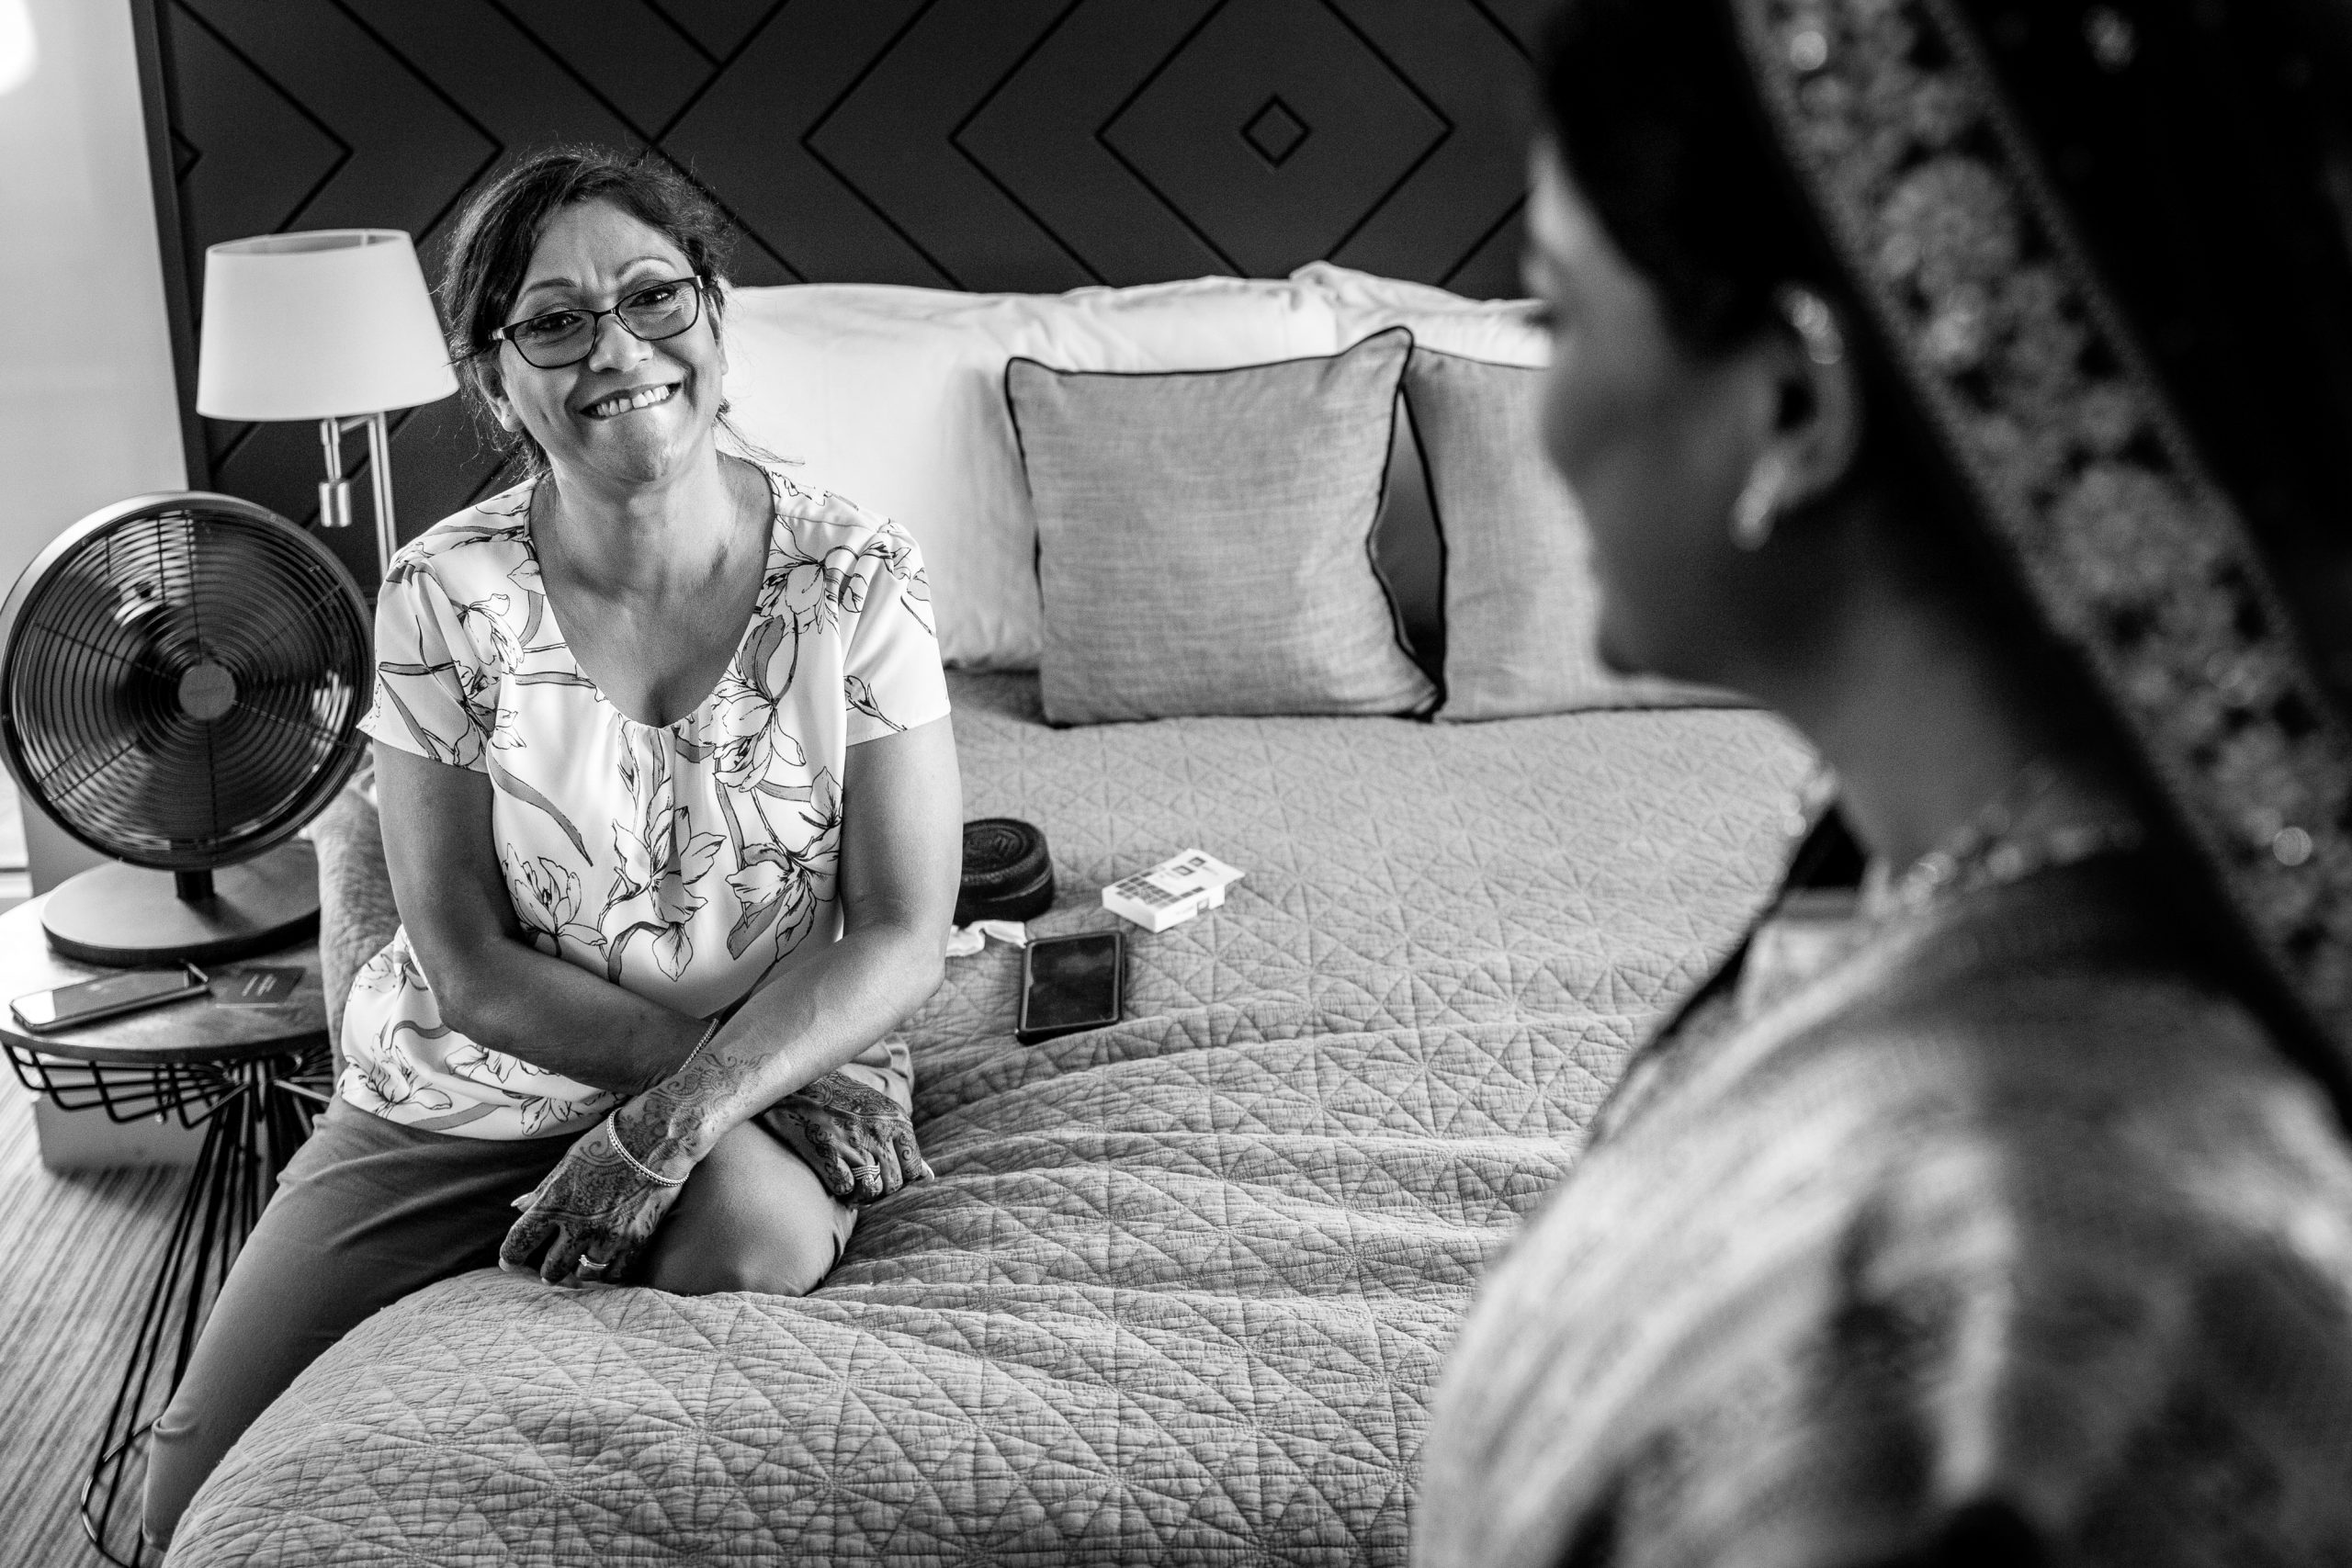 mother_of_the_bride looking lovingly at bride during bridal prep of indian fusion wedding at denbies dorking natural unposed candid wedding photography by LGBTQ_friendly documentary wedding photographer surrey sussex